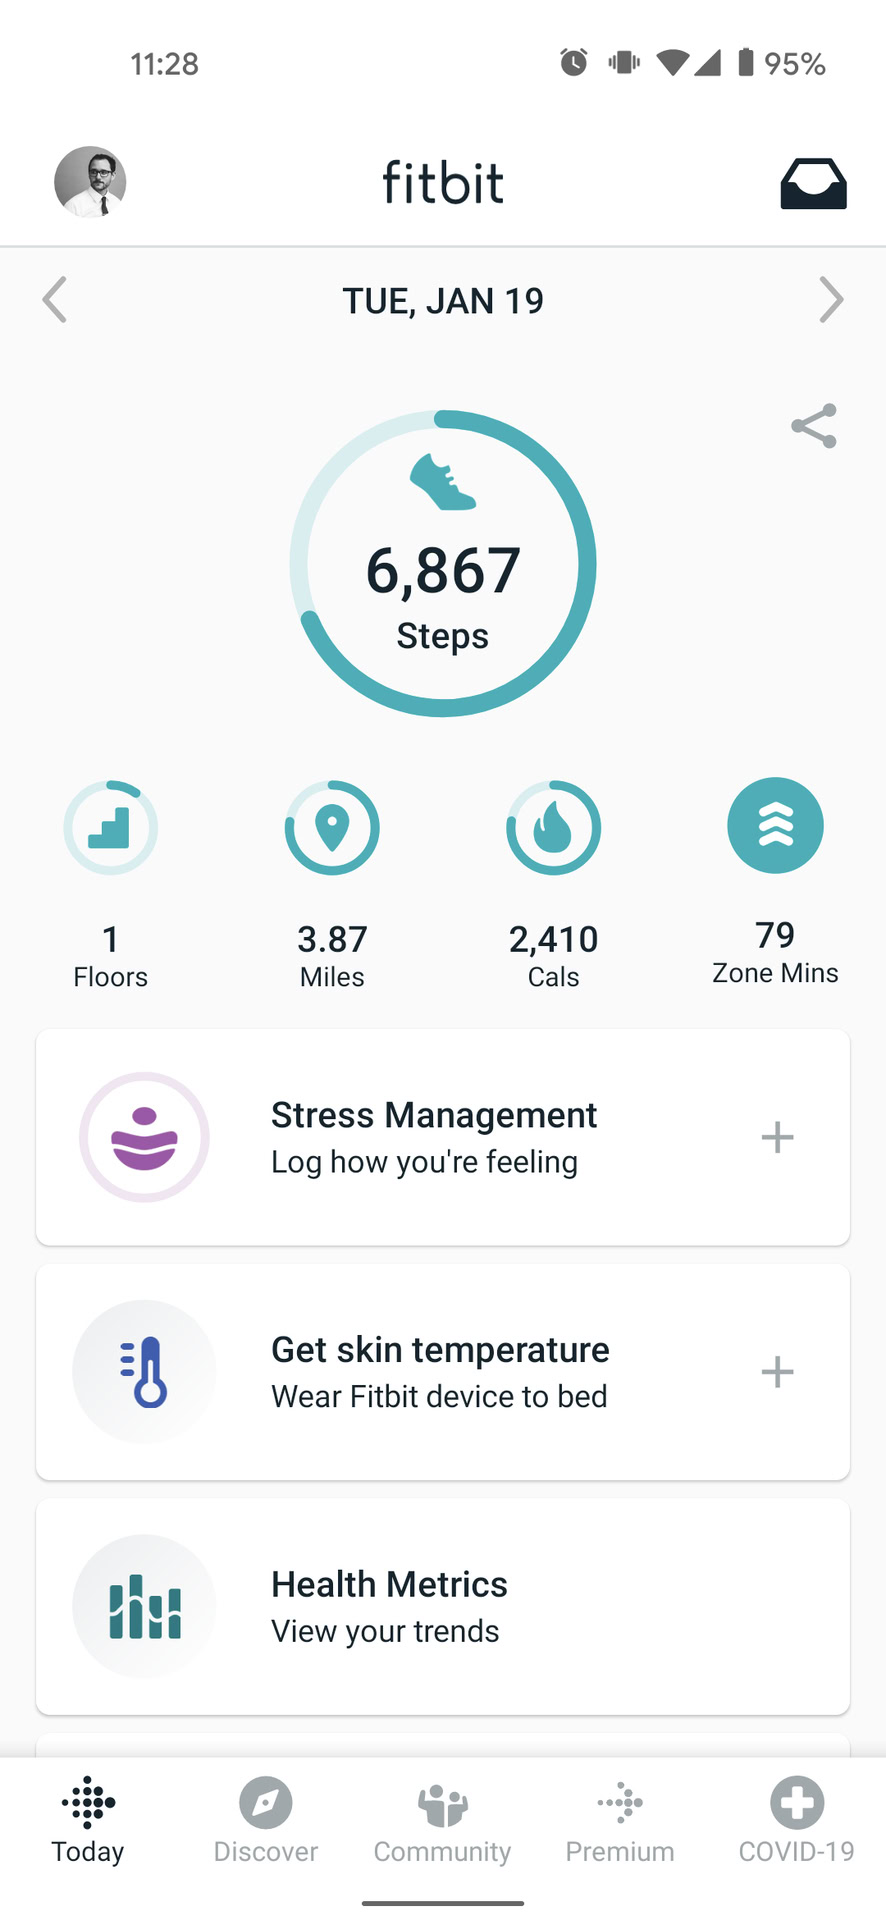 fitbit app home screen today tab